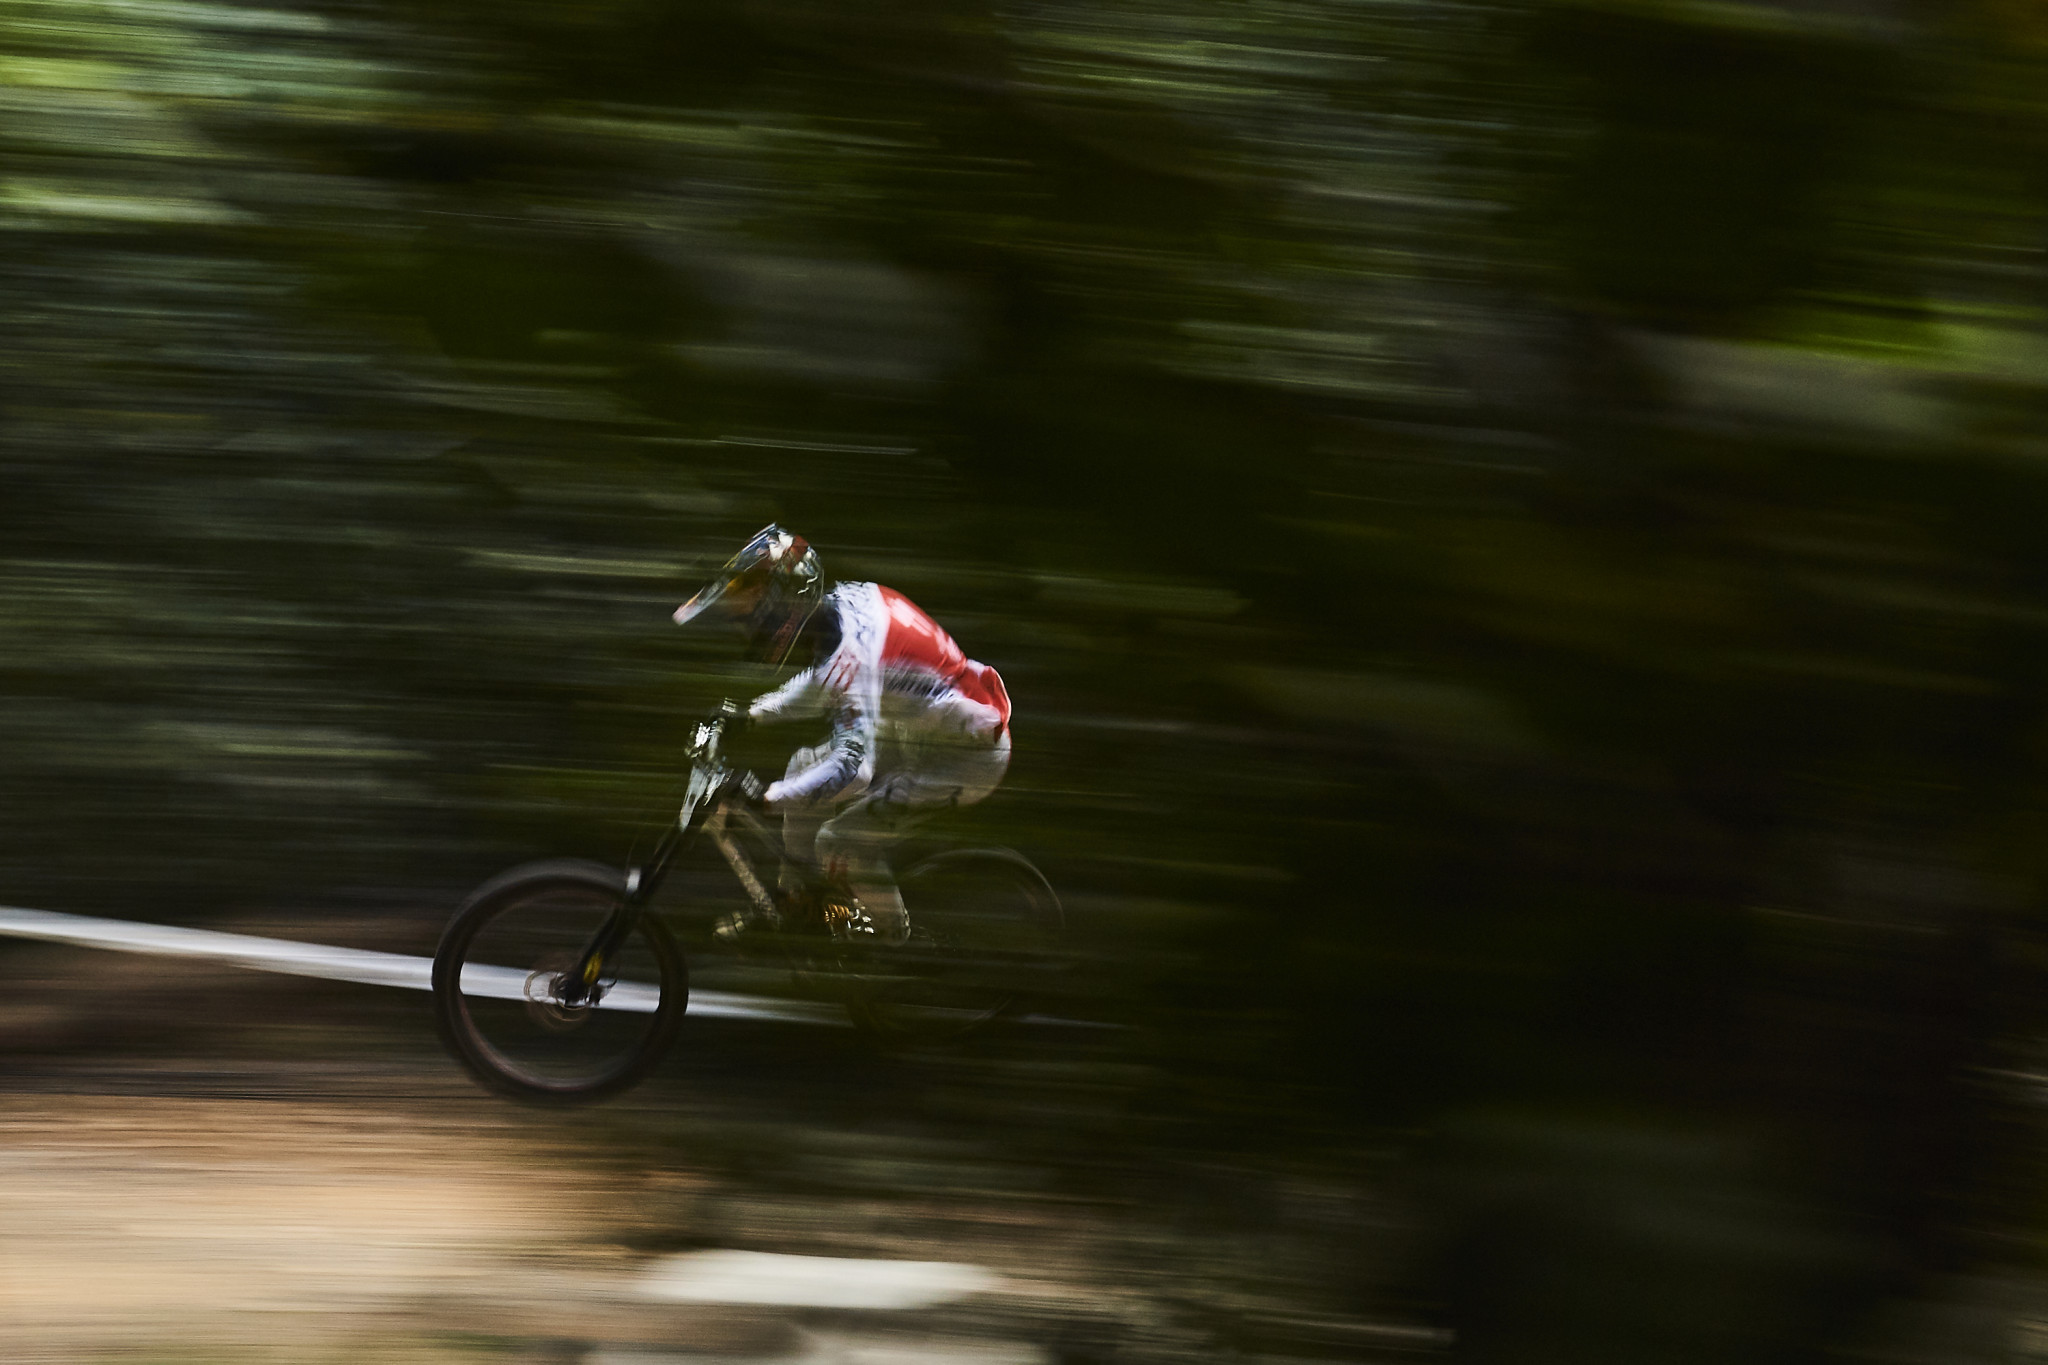 Forty-four nations ready for UCI Mountain Bike World Championships in Mont-Sainte-Anne